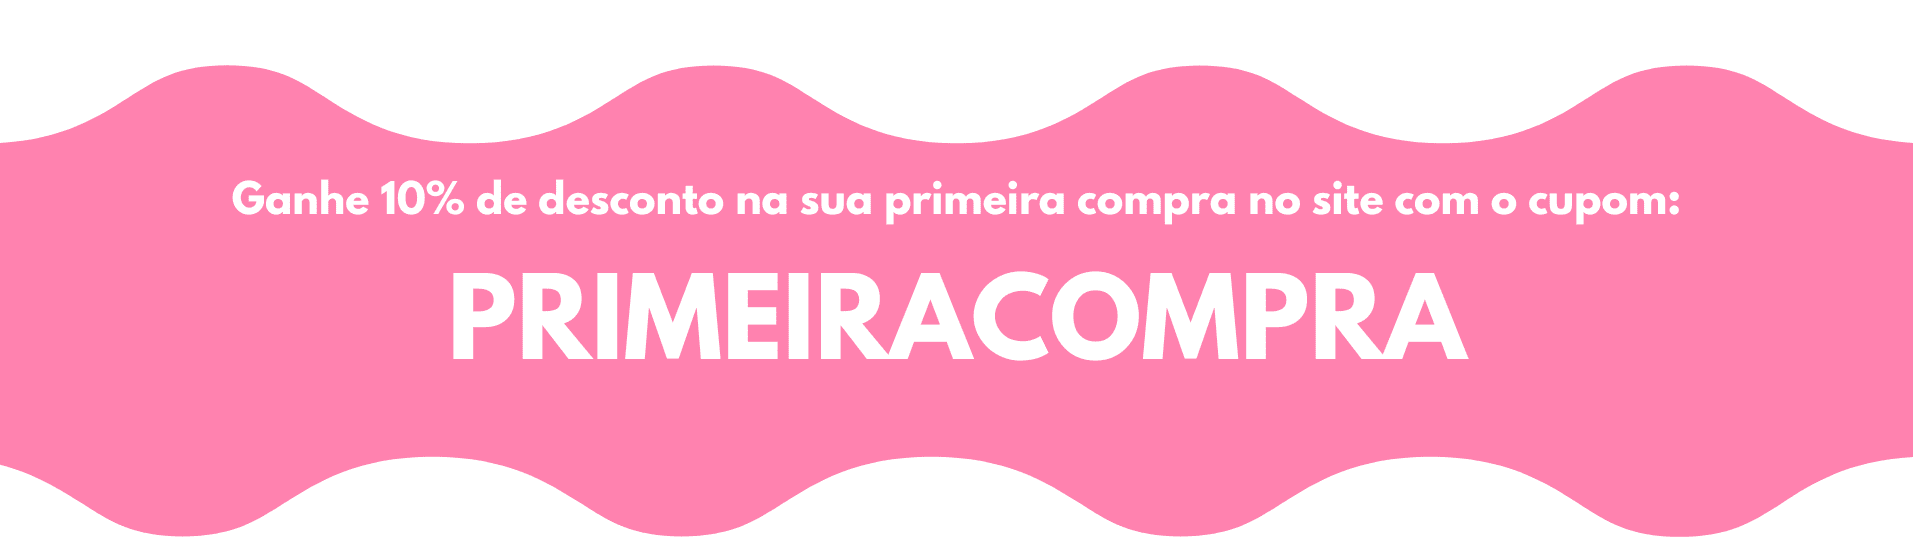 banners-primeiracompra